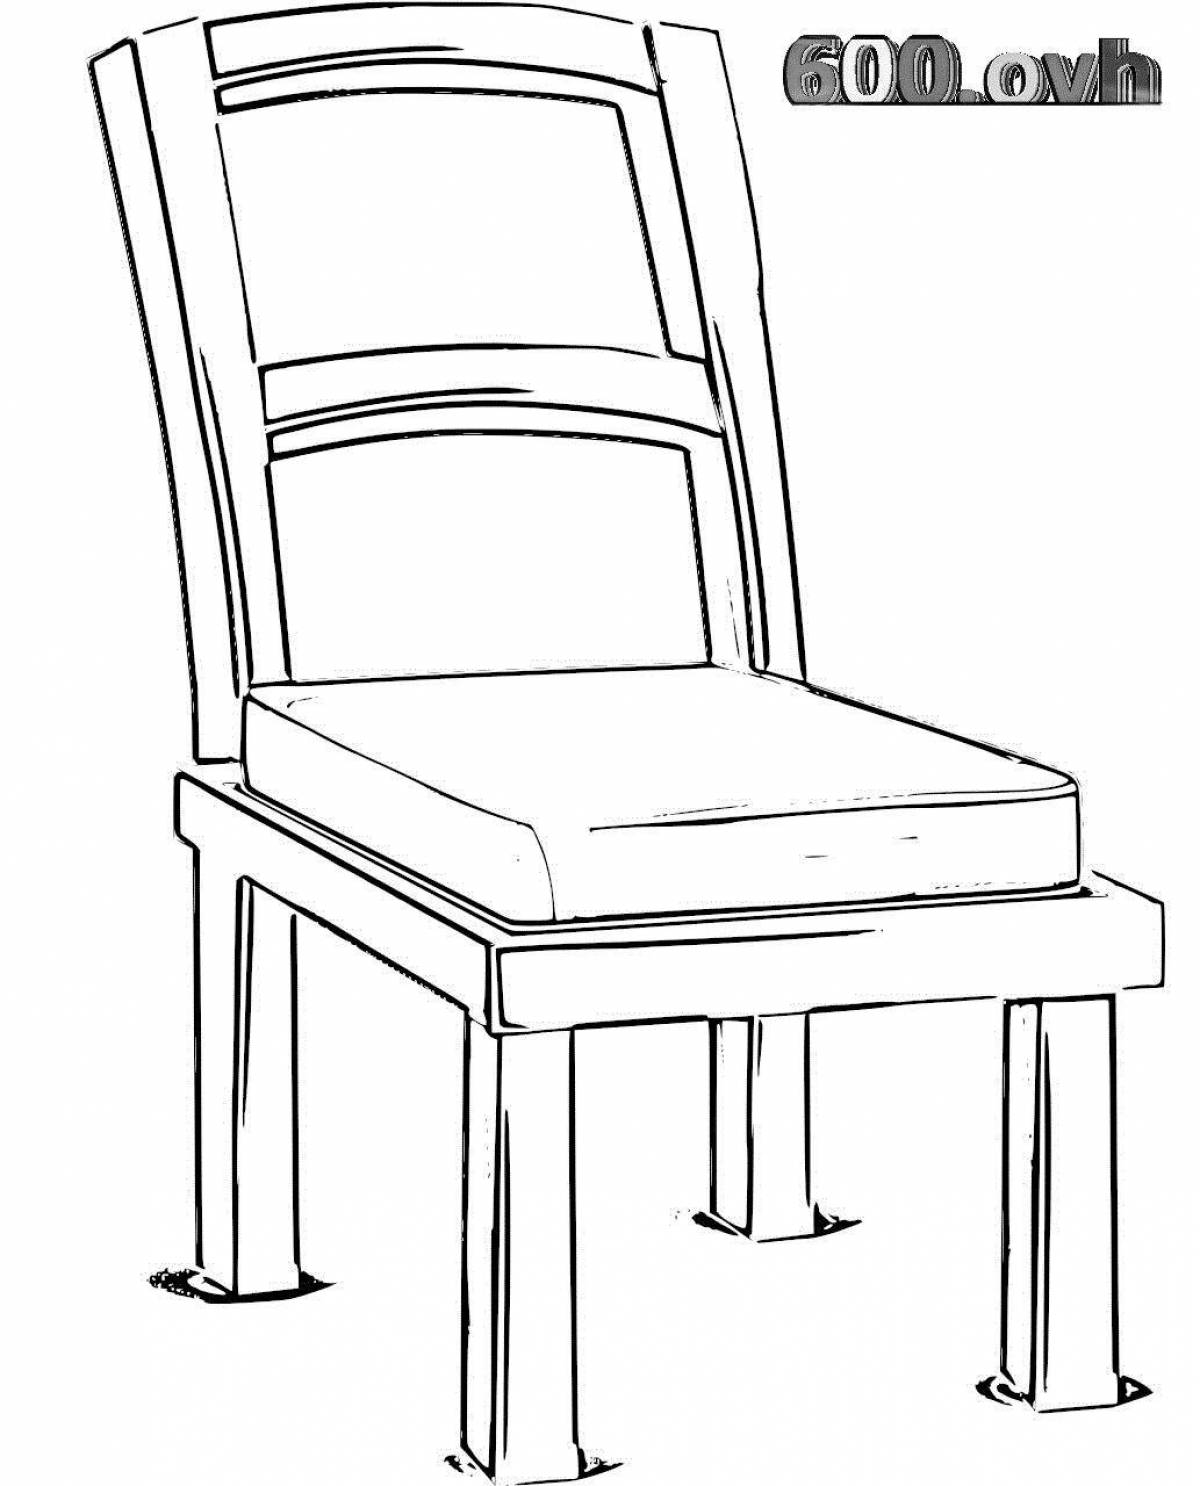 Adorable highchair coloring page